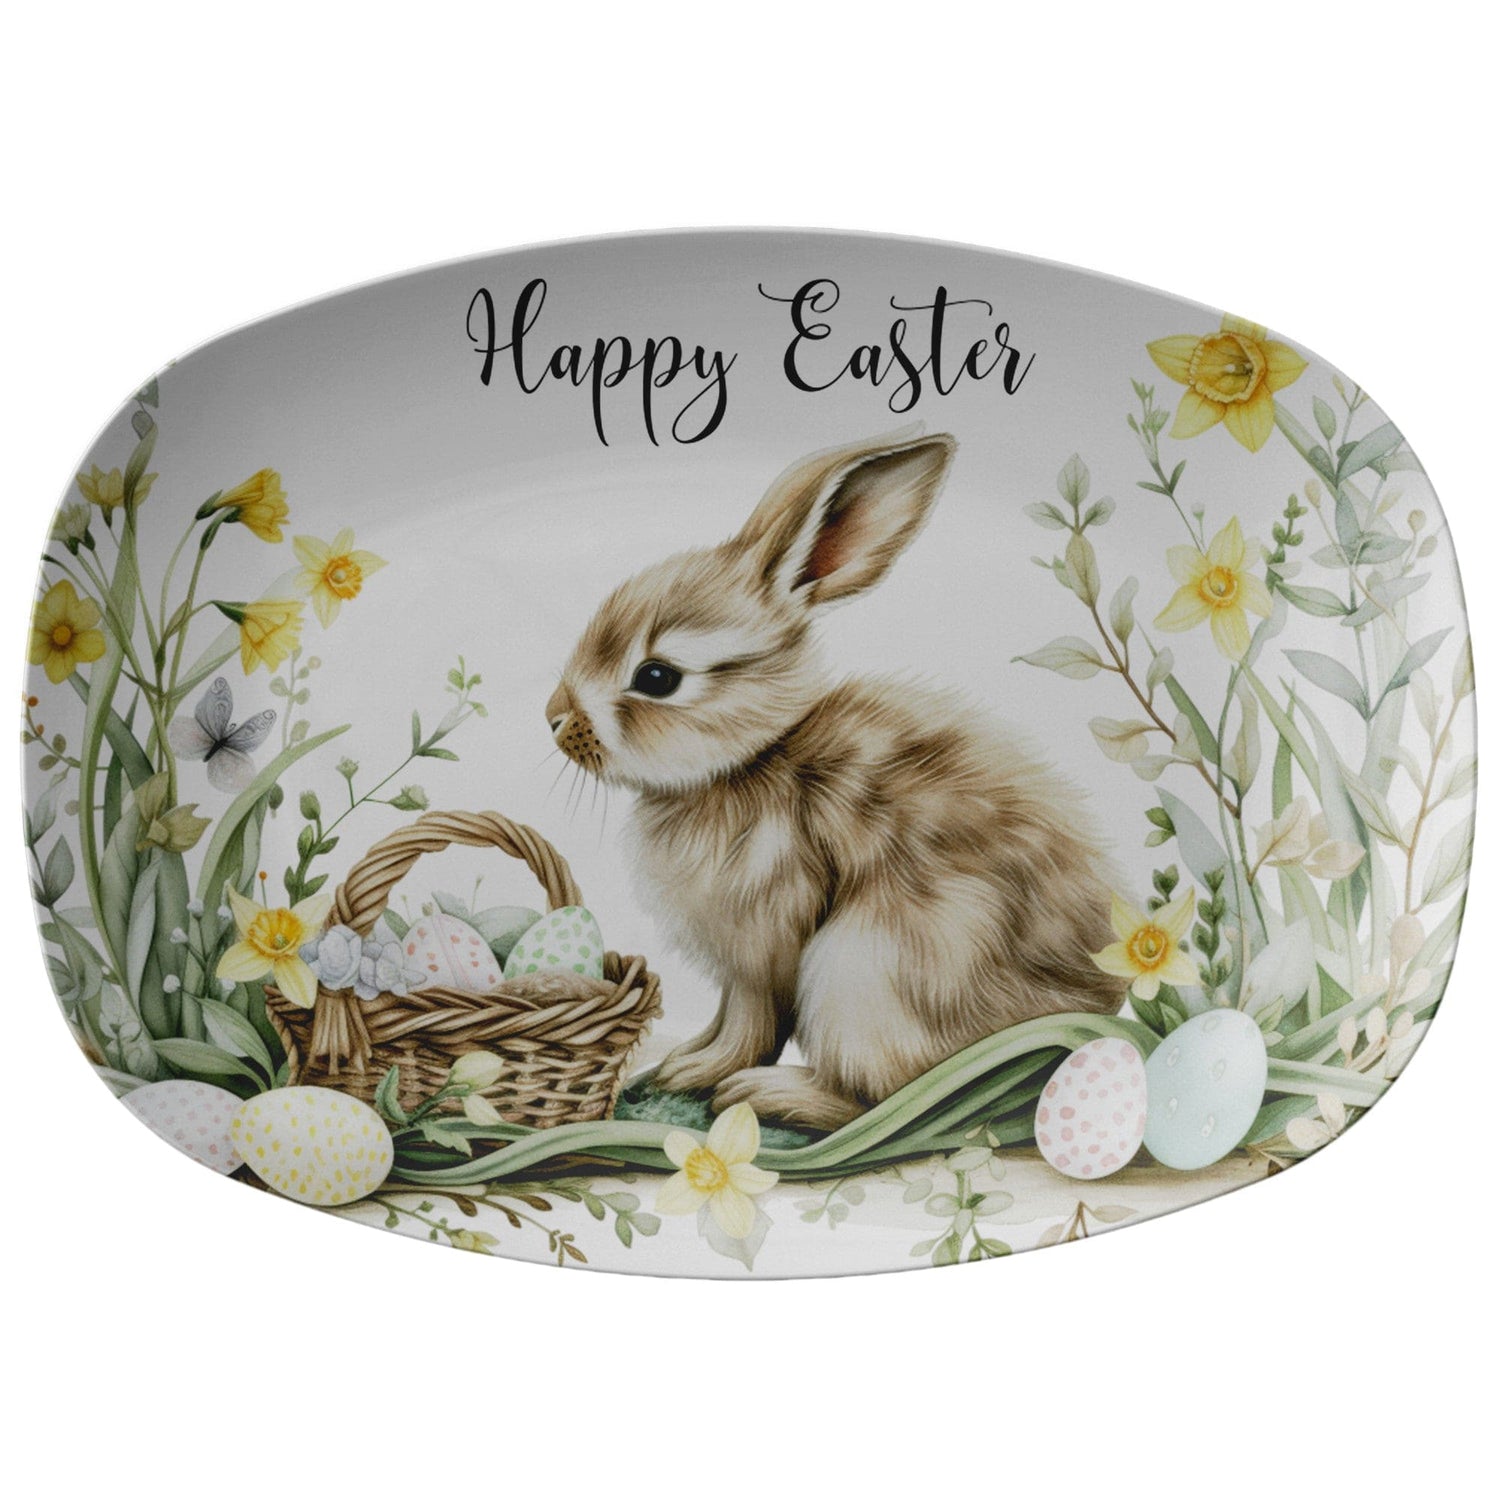 teelaunch Happy Easter Bunny Serving Platter, Spring Floral Decorative Plate Kitchenware default 9727